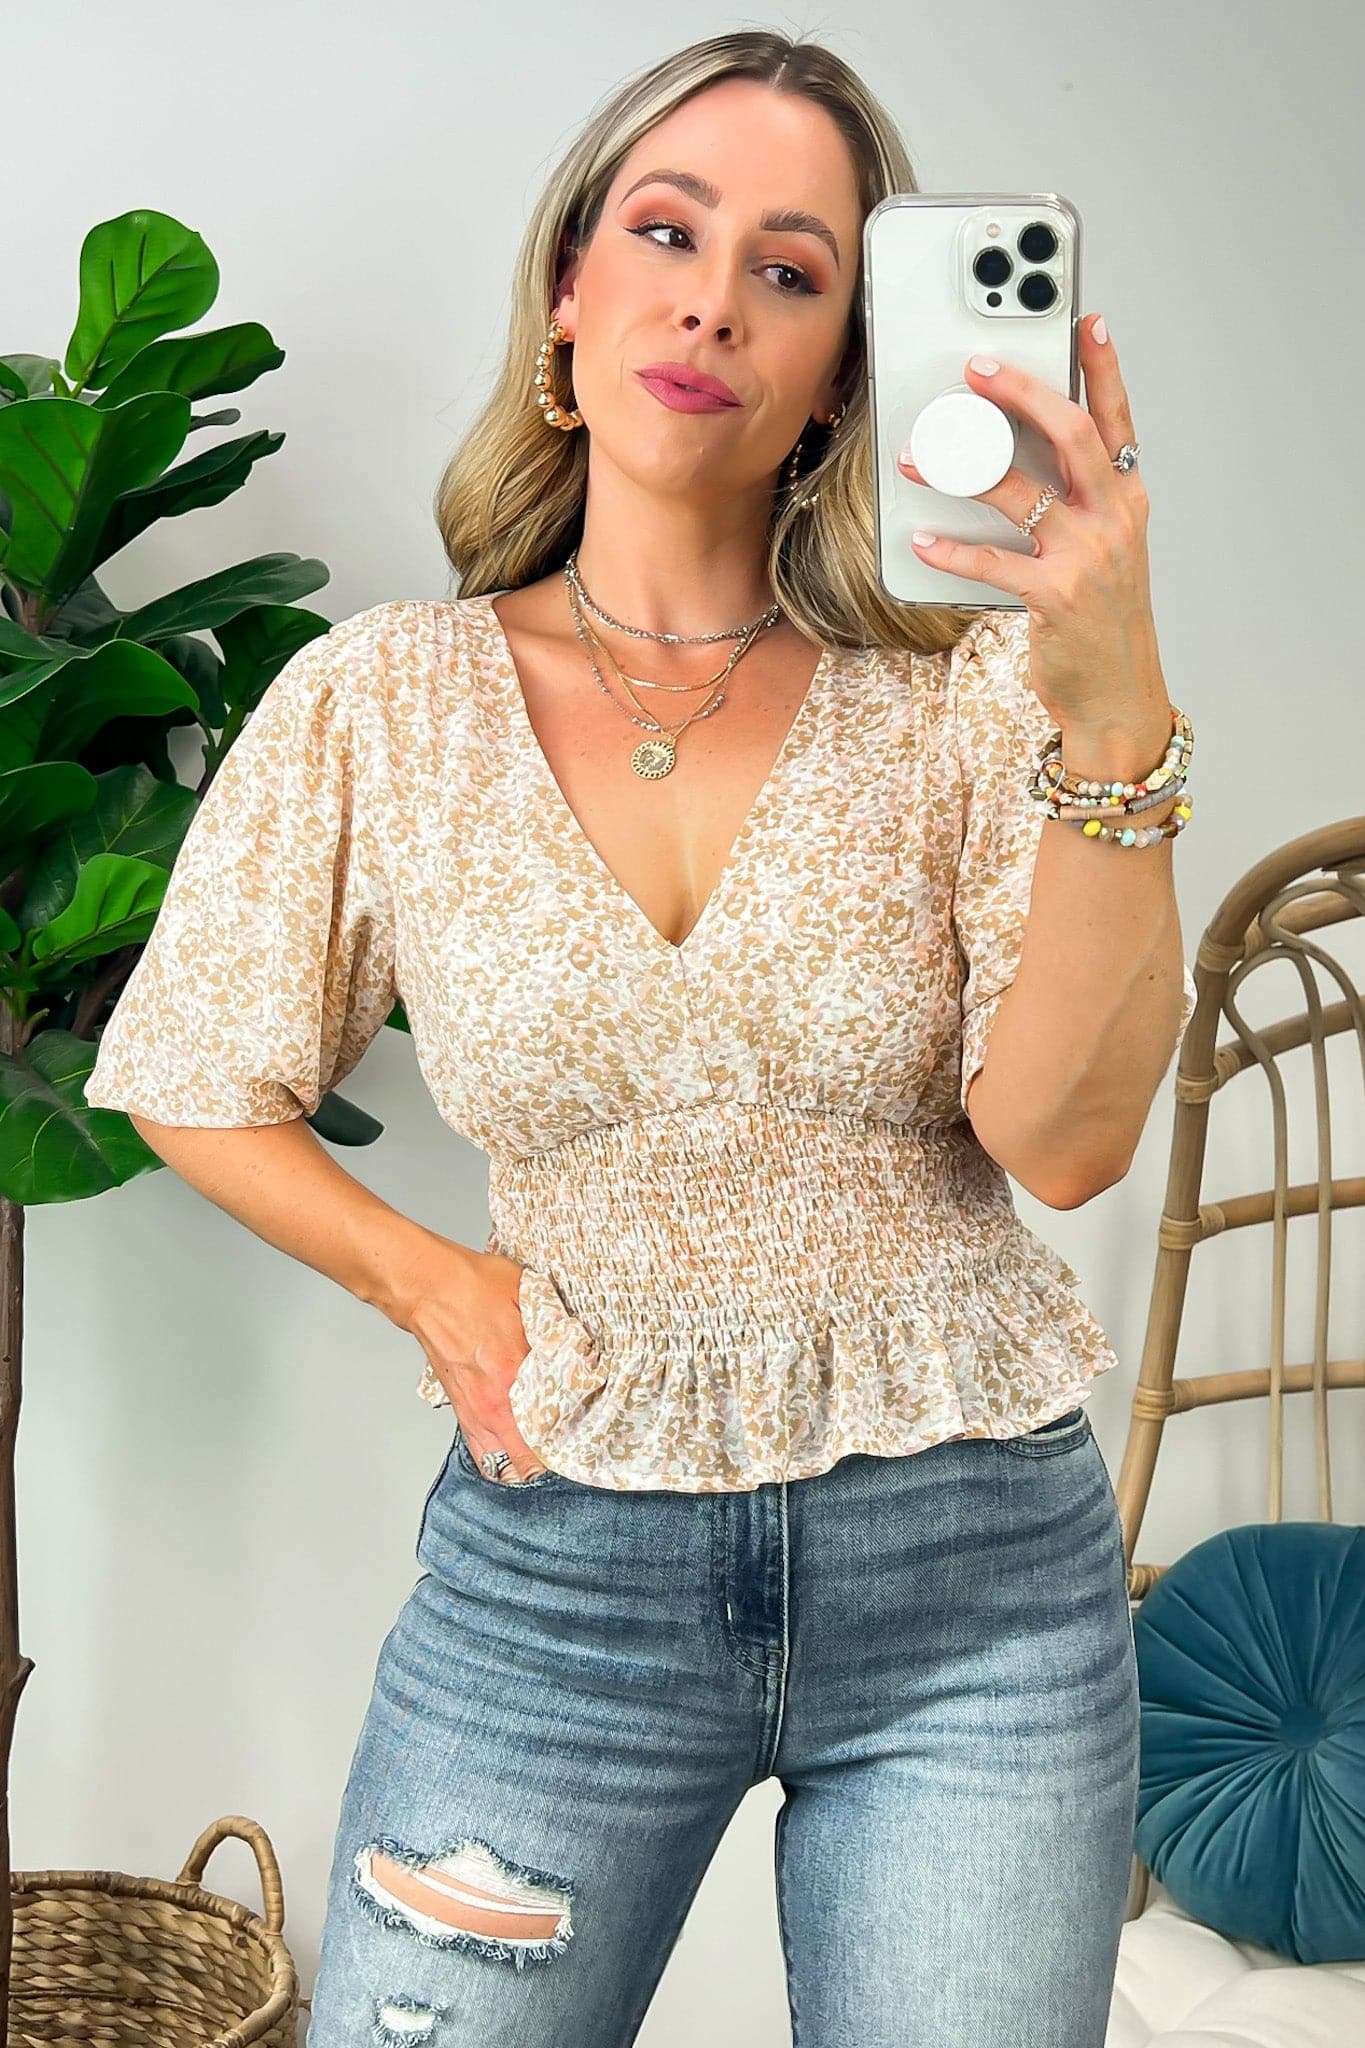  Unique Impression Floral Smocked Top - FINAL SALE - Madison and Mallory